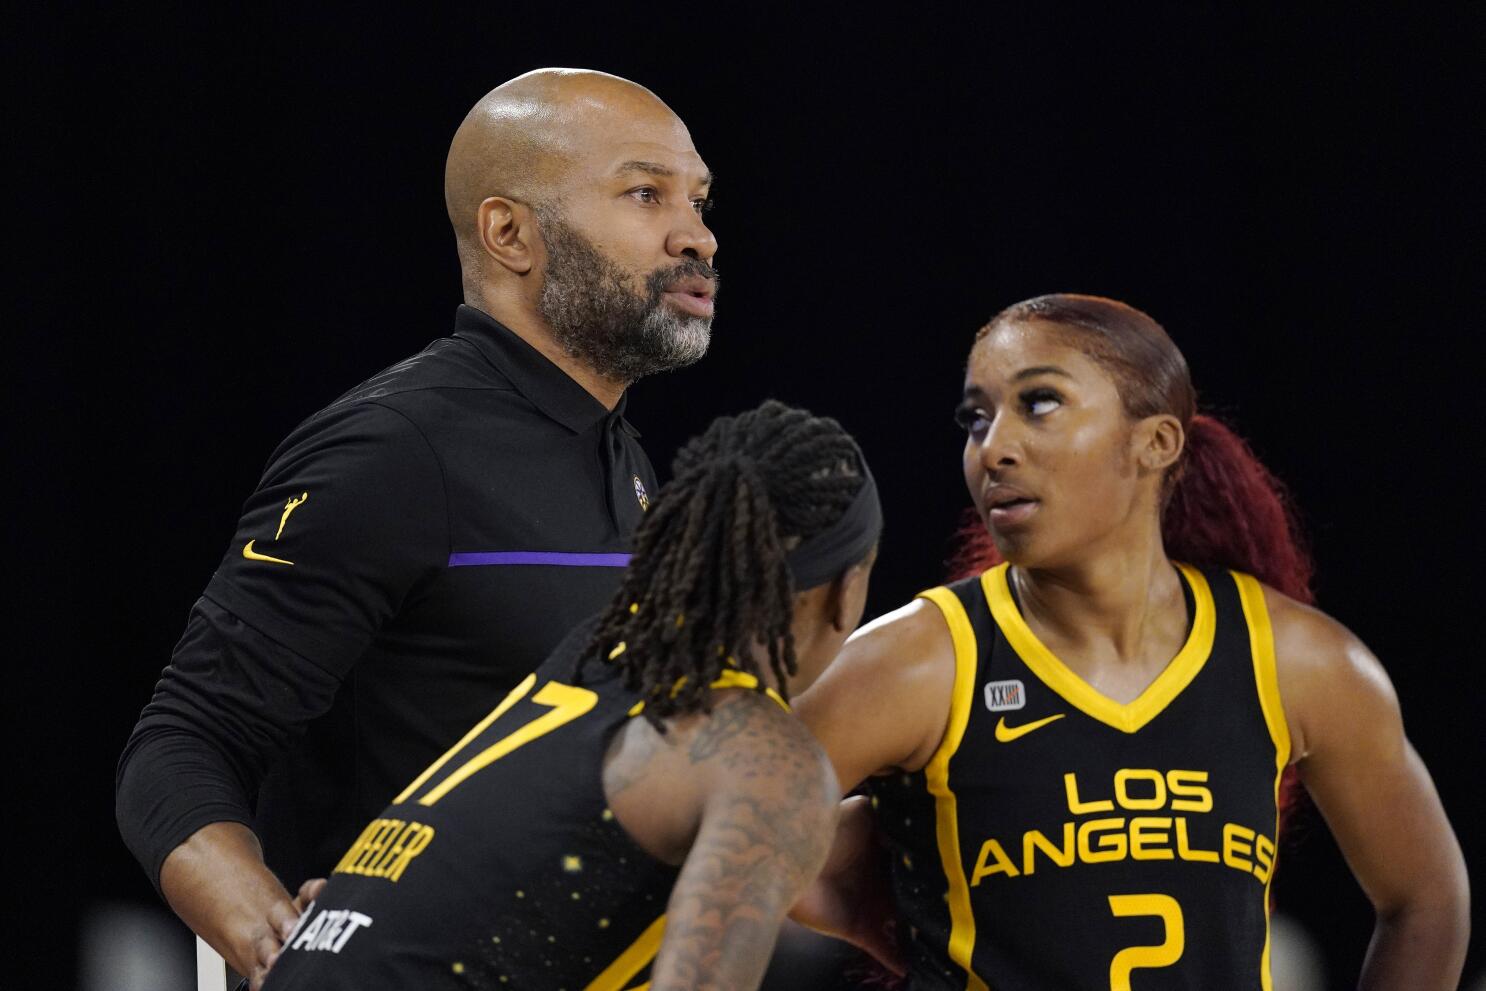 Sparks' new deeper roster boosts optimism for WNBA title run - Los